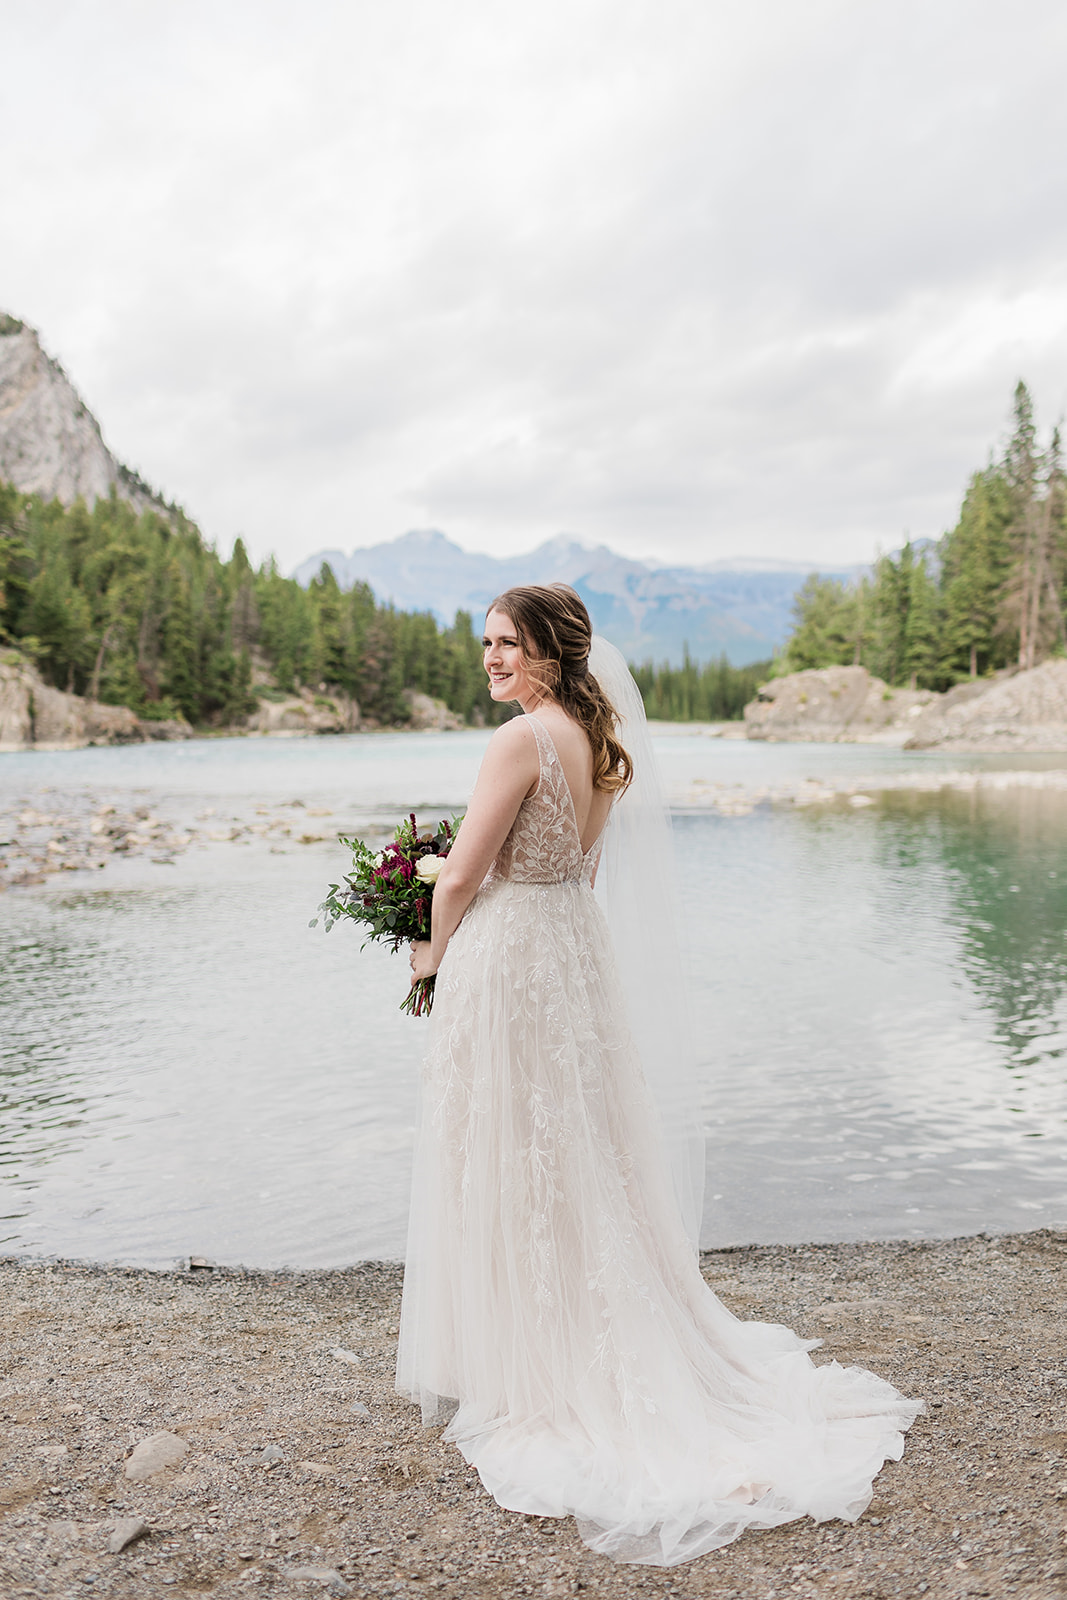 Bride and Groom wedding photos in Banff, Alberta by Jess Collins